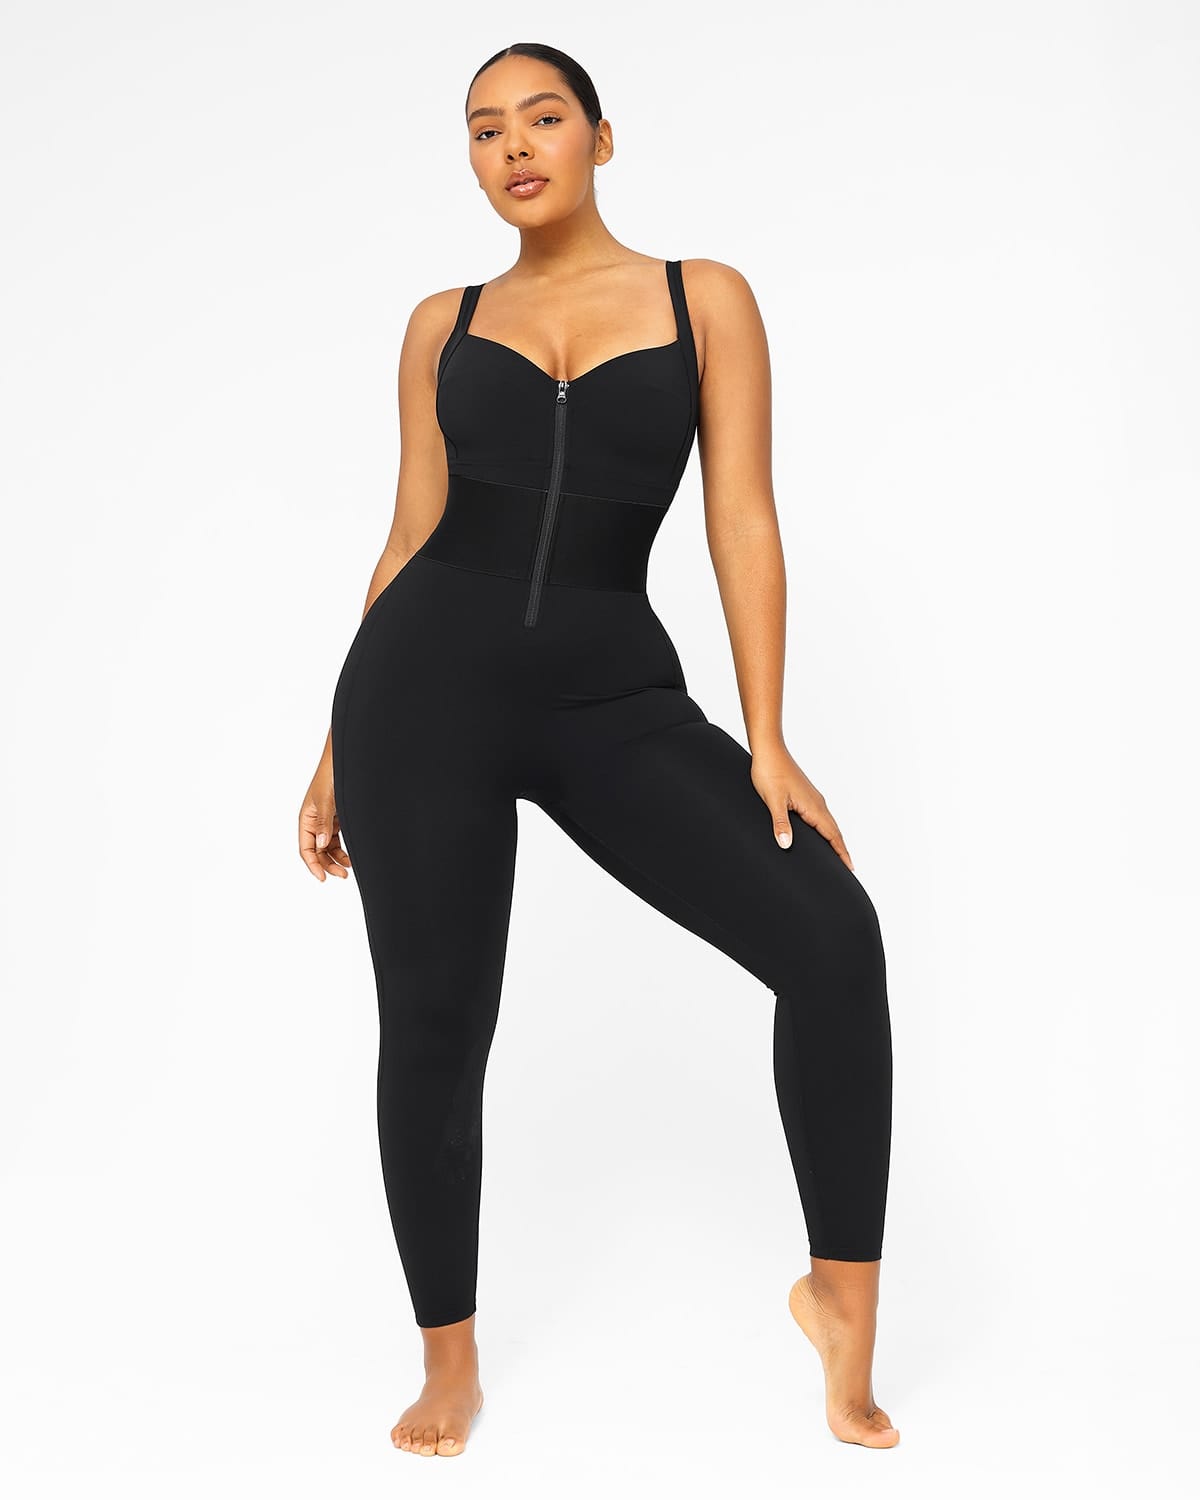 Womens Jumpers And Rompers Casual Seamless Long Sleeve Bodysuit Shapewear  Thong Sculpting Body Shaper Romper Black XL